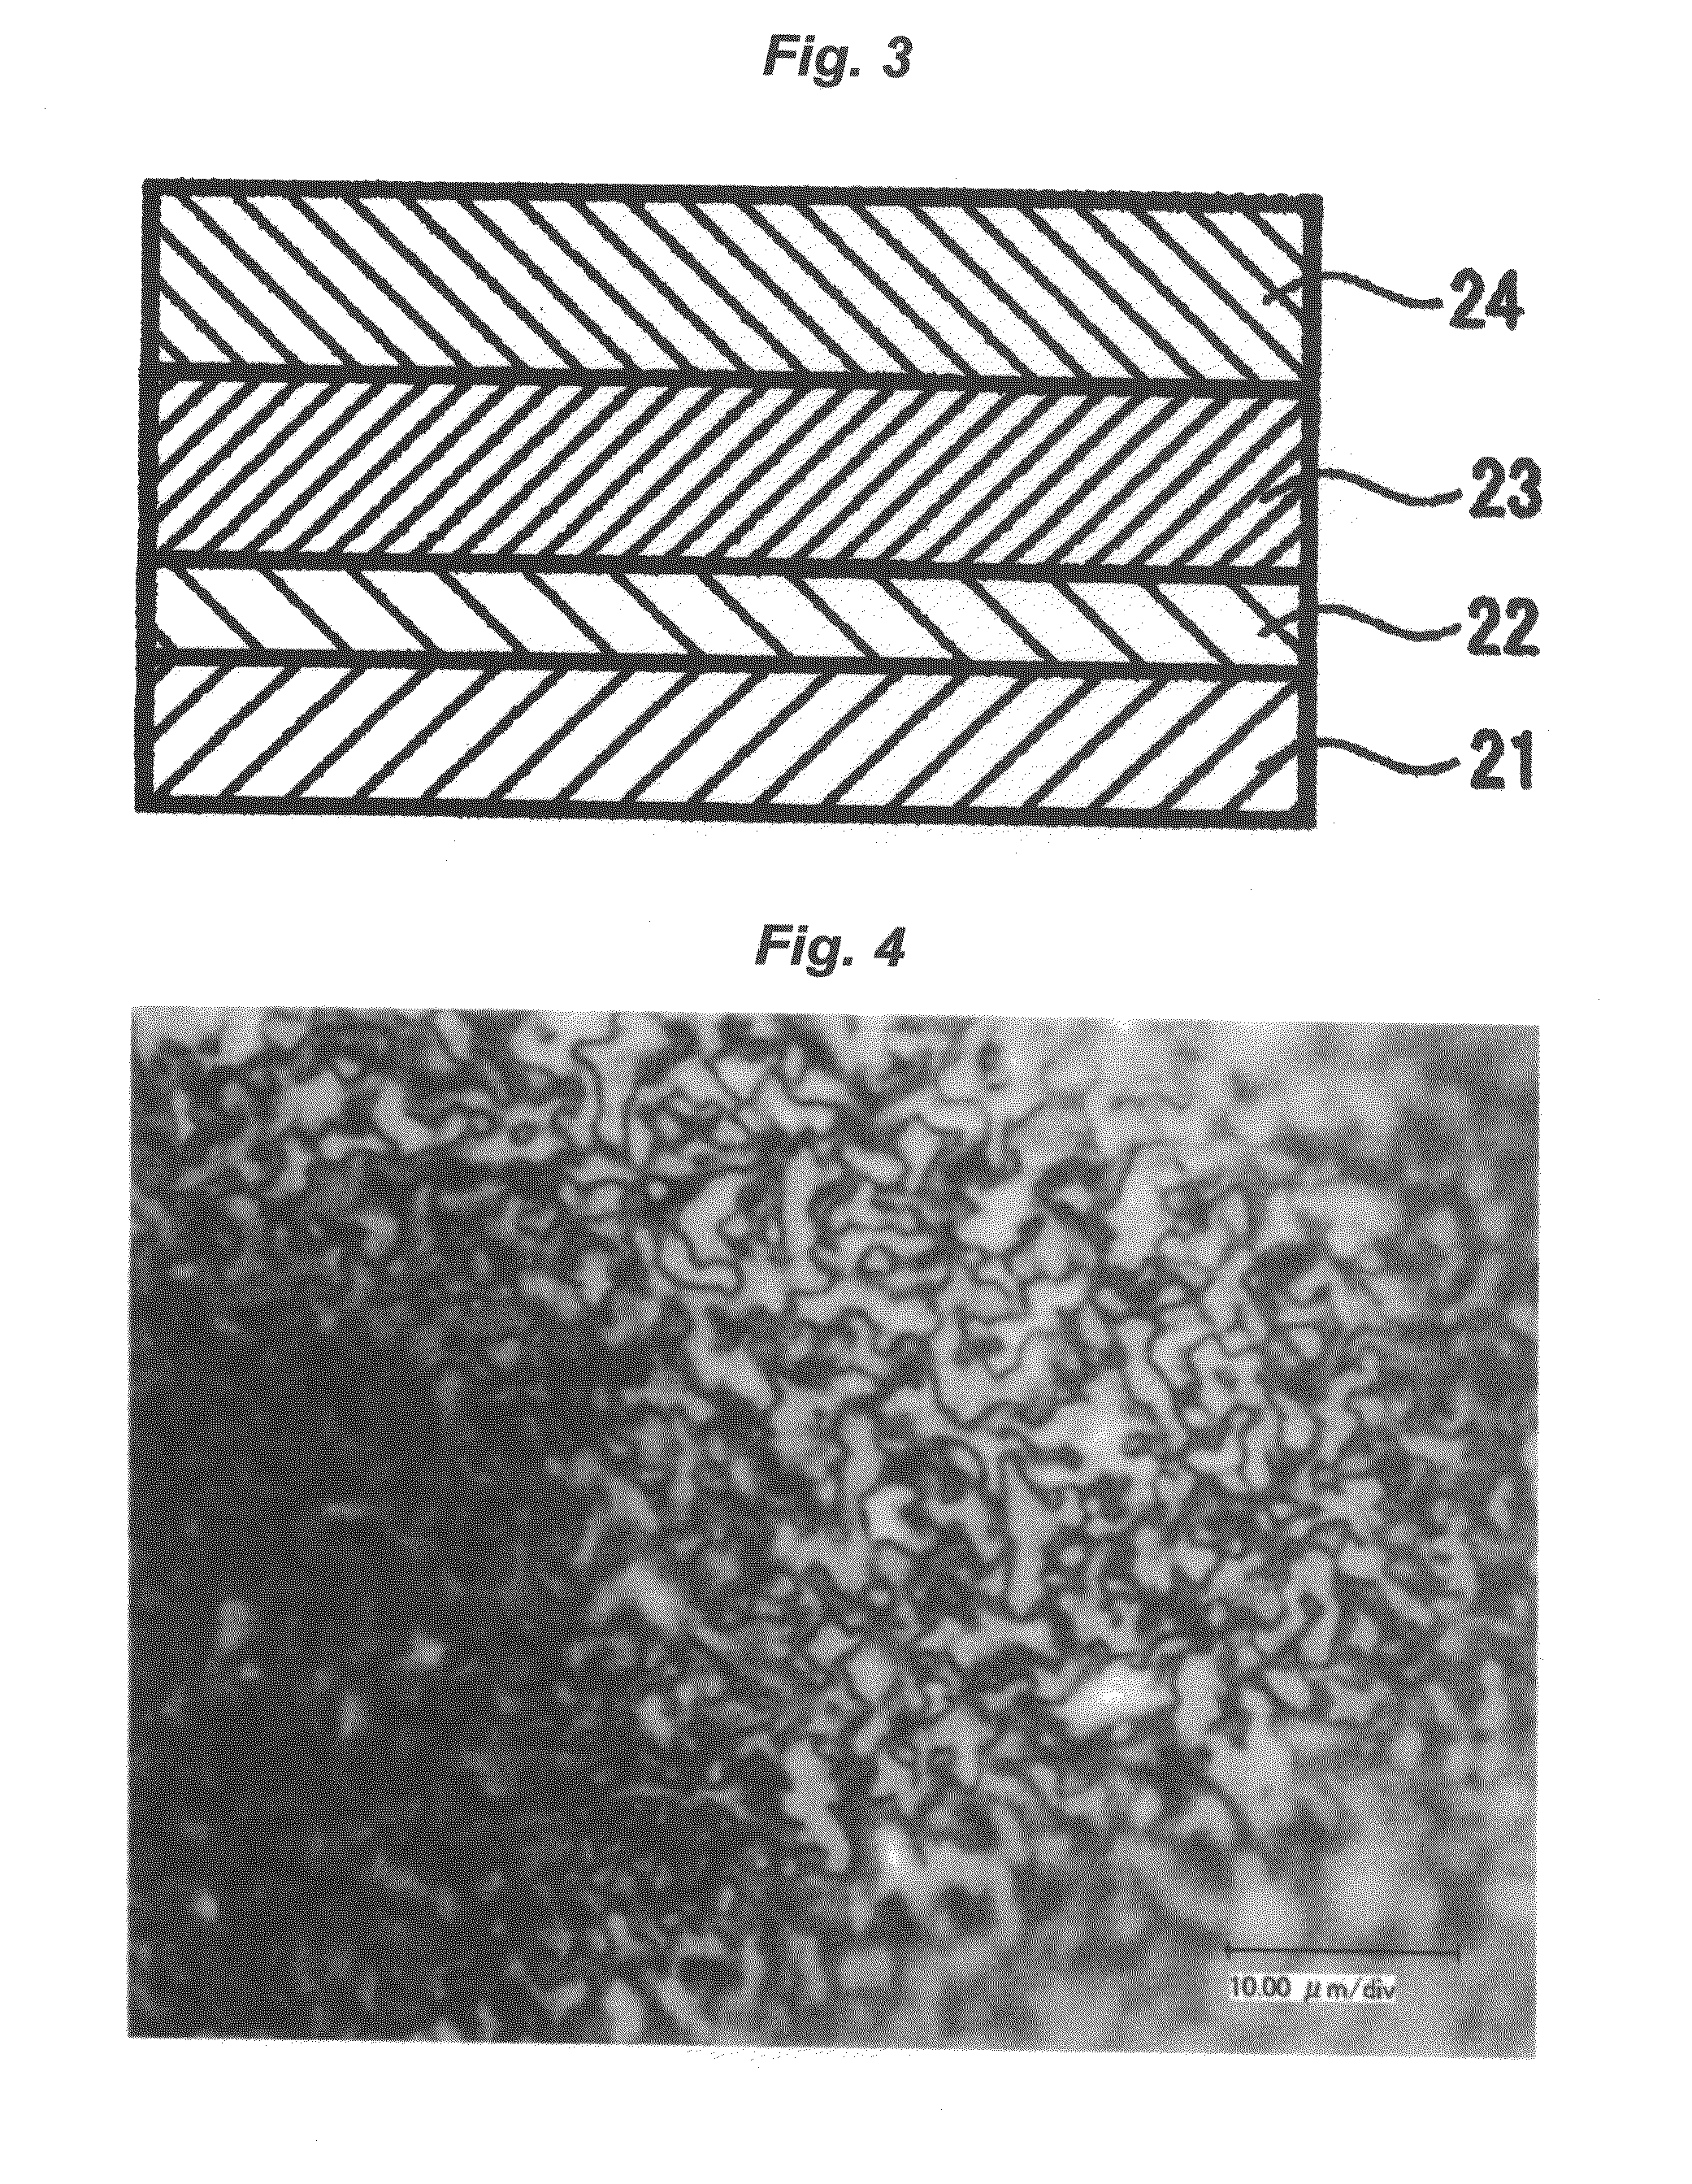 Liquid crystalline organic semiconductor material and organic electron device